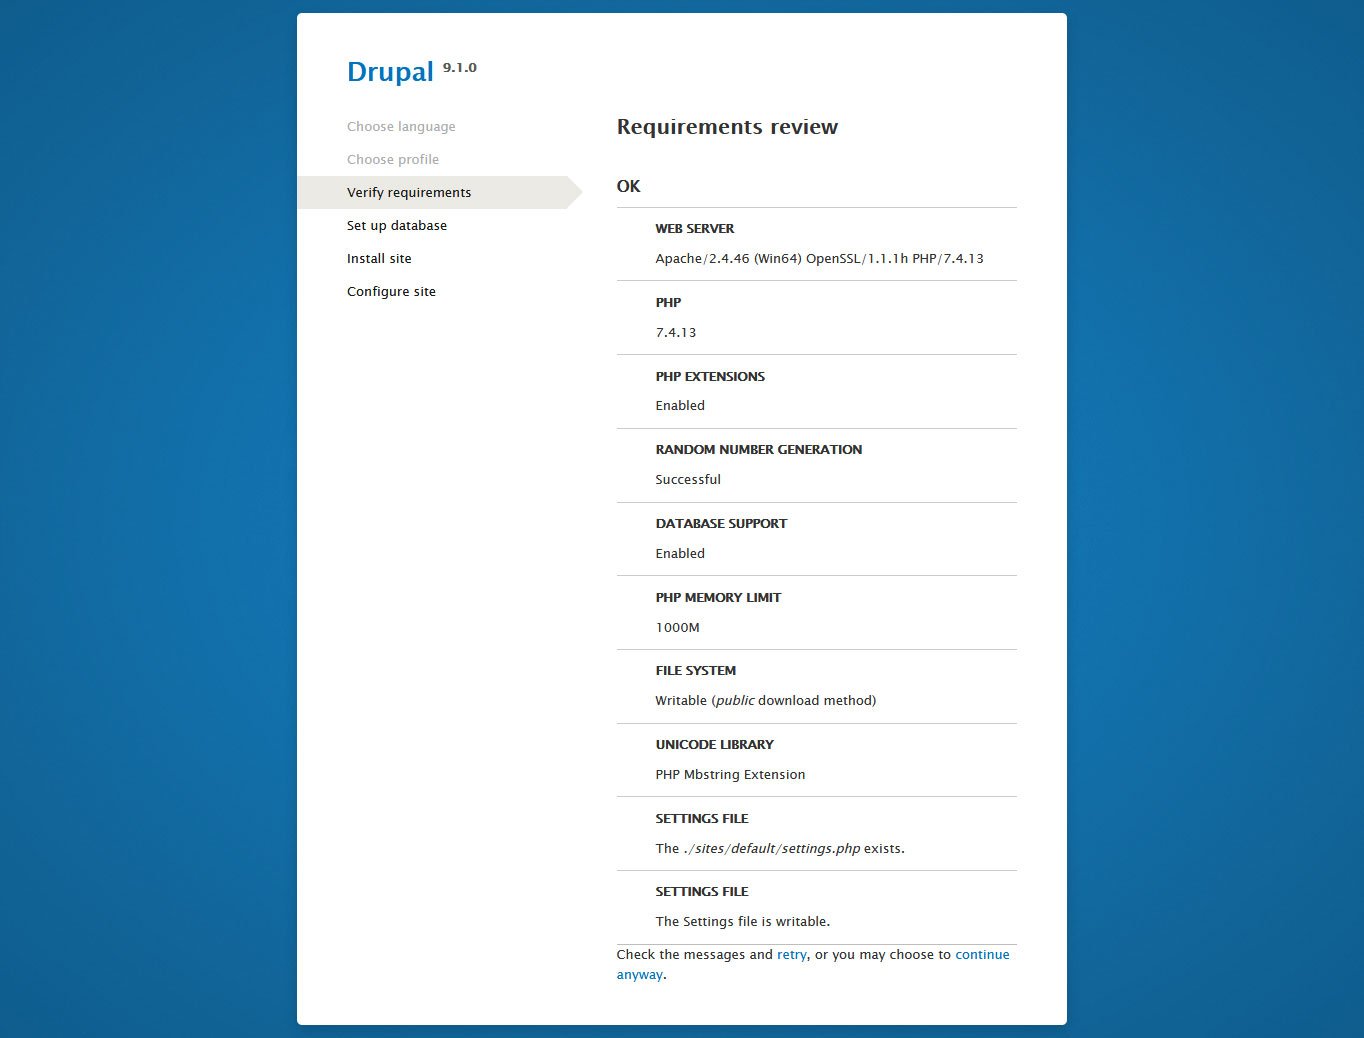 drupal installation requirements review